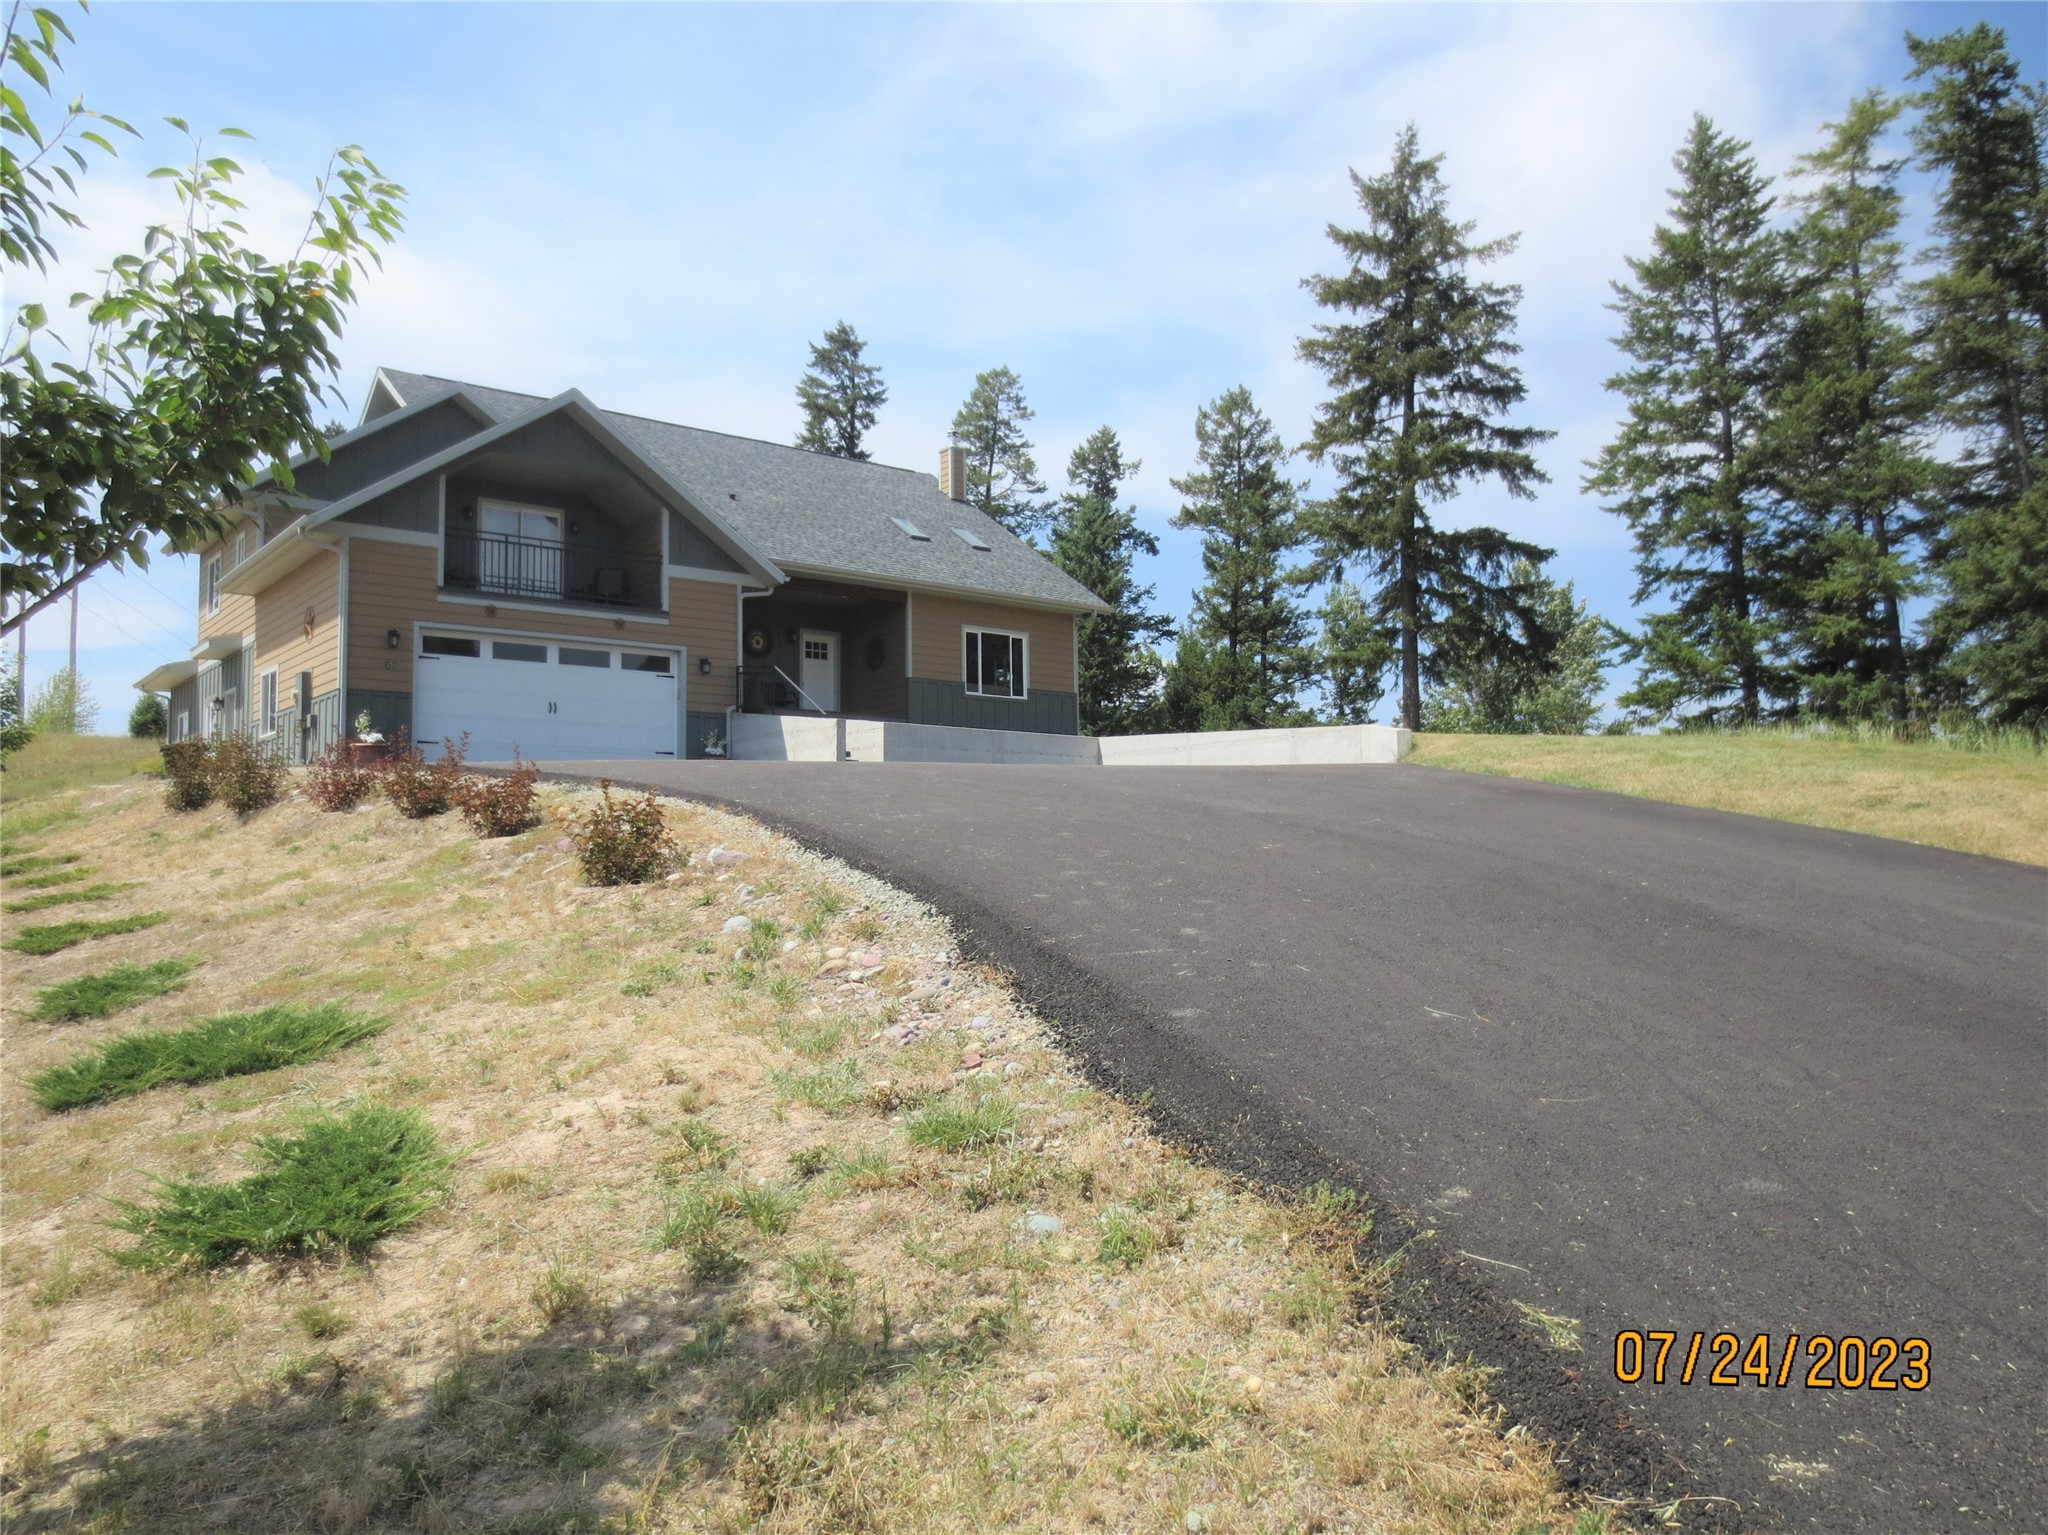 Custom 3,980 sq ft home w/beautiful, varied views of Flathead River, Whitefish Mtn resort, the Swan Range & wildlife, from inside & outside of this well-appointed one-owner home! Borders state land on one side & HOA woods on another; yet only 4 minutes driving time into Kalispell. Main floor master bedroom, office & laundry. Upper level great room boasts it's own kitchen, laundry, balcony & exterior view deck ,making an ideal apartment for in-laws, extended stay guests, nanny, etc. 2 zone heat & A/C. Wired/plumbed for sump pump, radon, & 4 zone sound system, if ever wanted/needed. Also includes 9' main floor ceilings, cozy wood stove, custom flooring, custom faux painting, built-ins, solid core doors, reverse osmosis water system, large indoor storage room & green/grow room with it's own sink. Perfect for guests & entertaining, utilizing 4 decks (mostly Trex), large poured patio & new paved driveway. A must see! To preview, call Barb at 406.261.0177, or your real estate professional. Two complete kitchens and laundry facilities: main floor and upper level.
Furniture is negotiable.